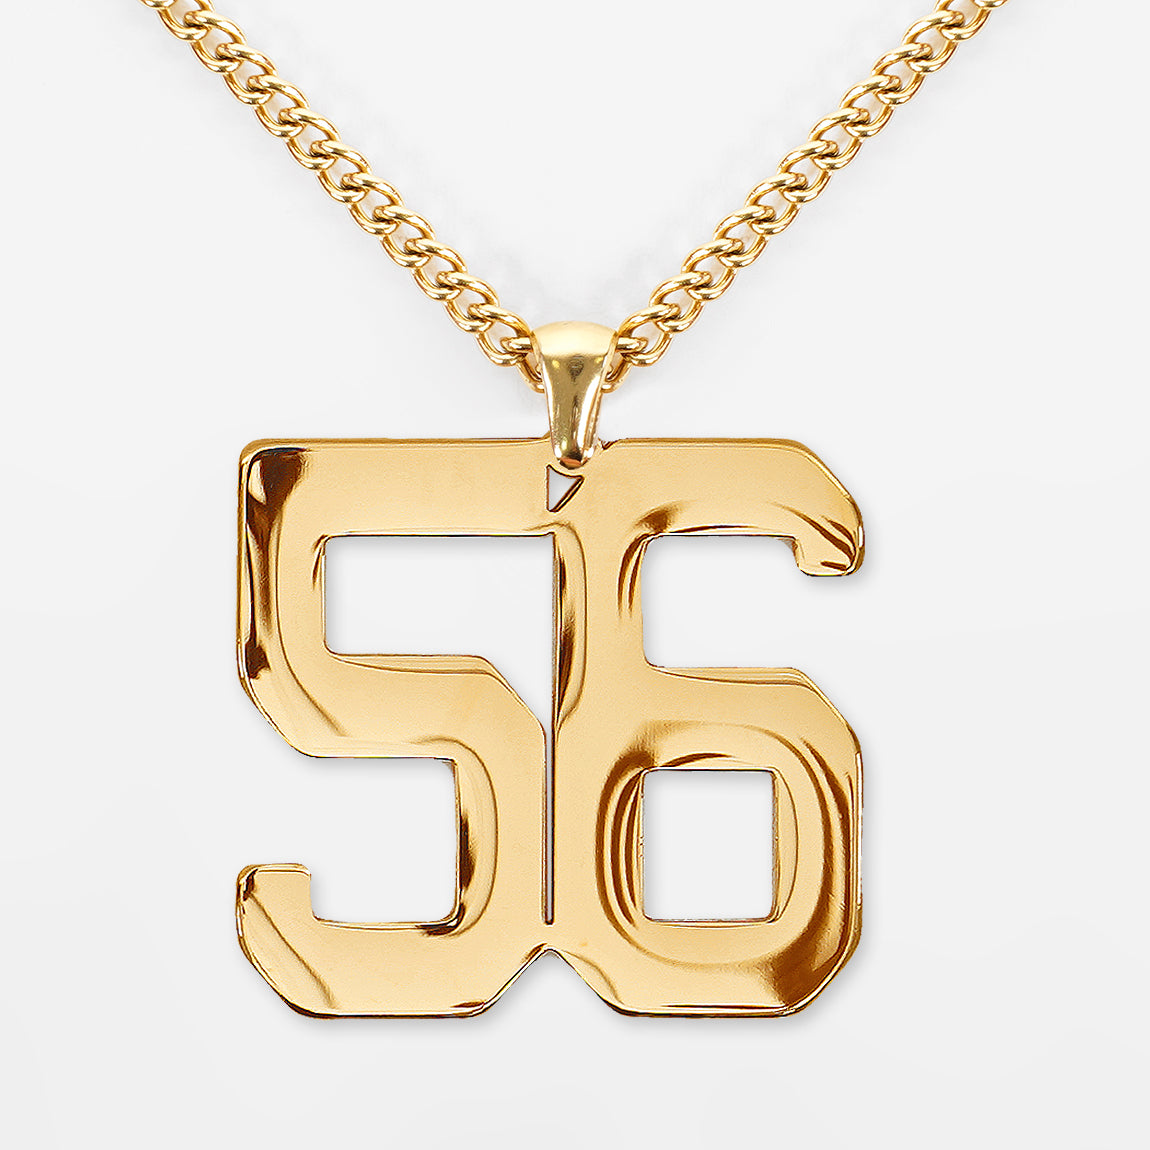 56 Number Pendant with Chain Necklace - Gold Plated Stainless Steel